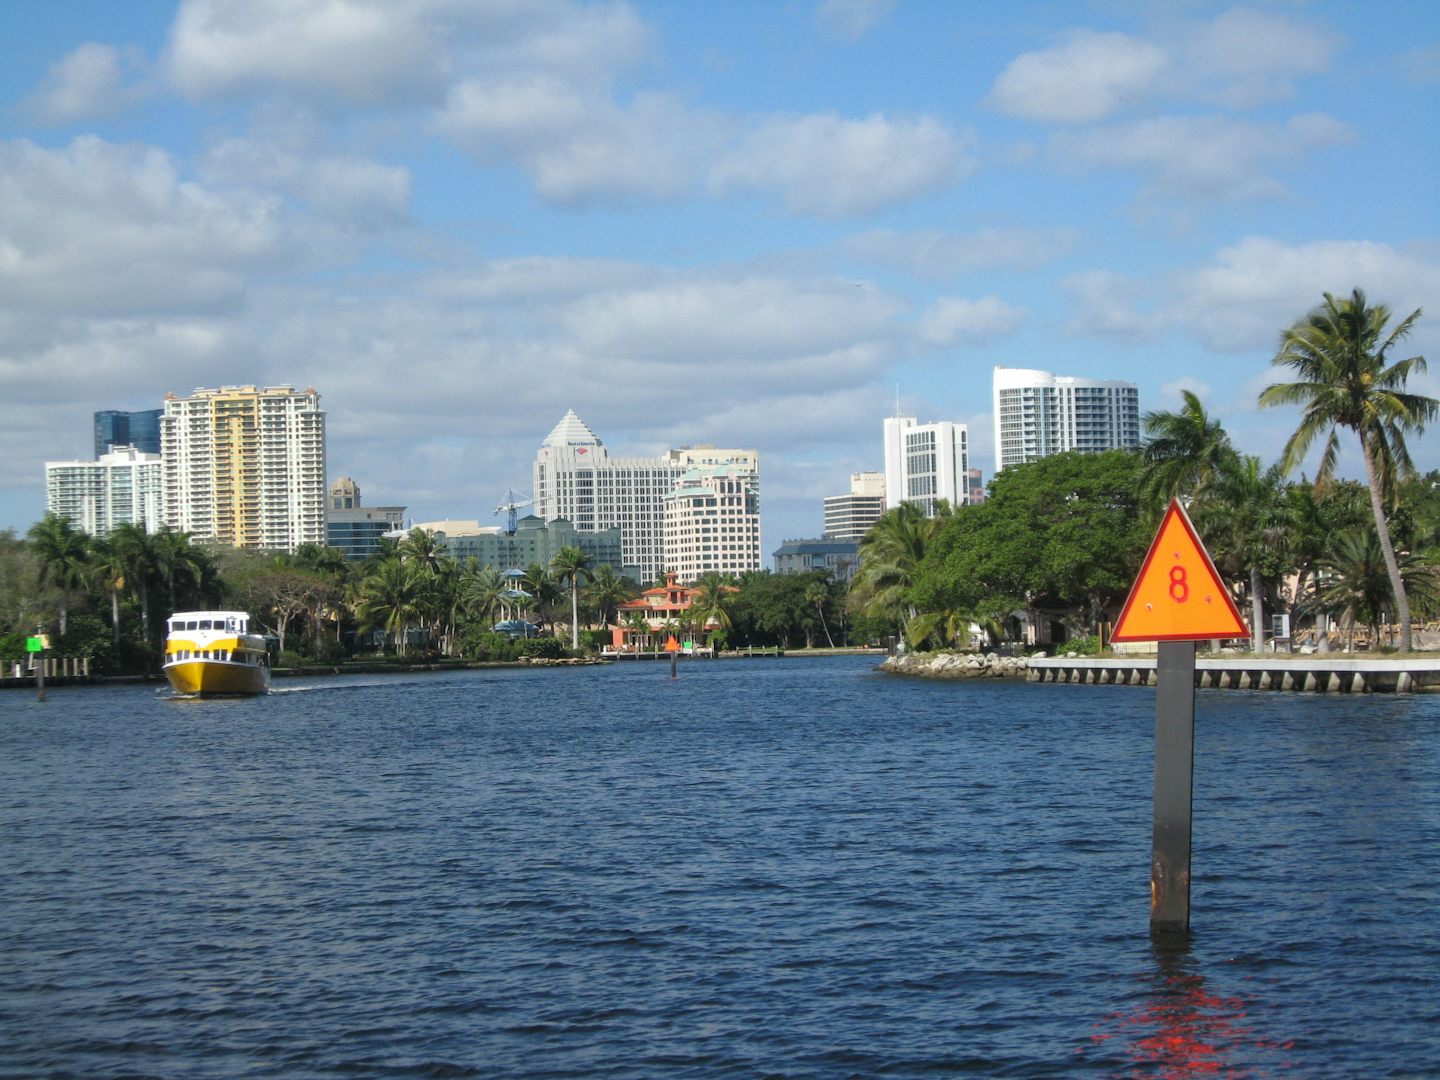 Ft. Lauderdale--called the The Venice of America; and for good reason